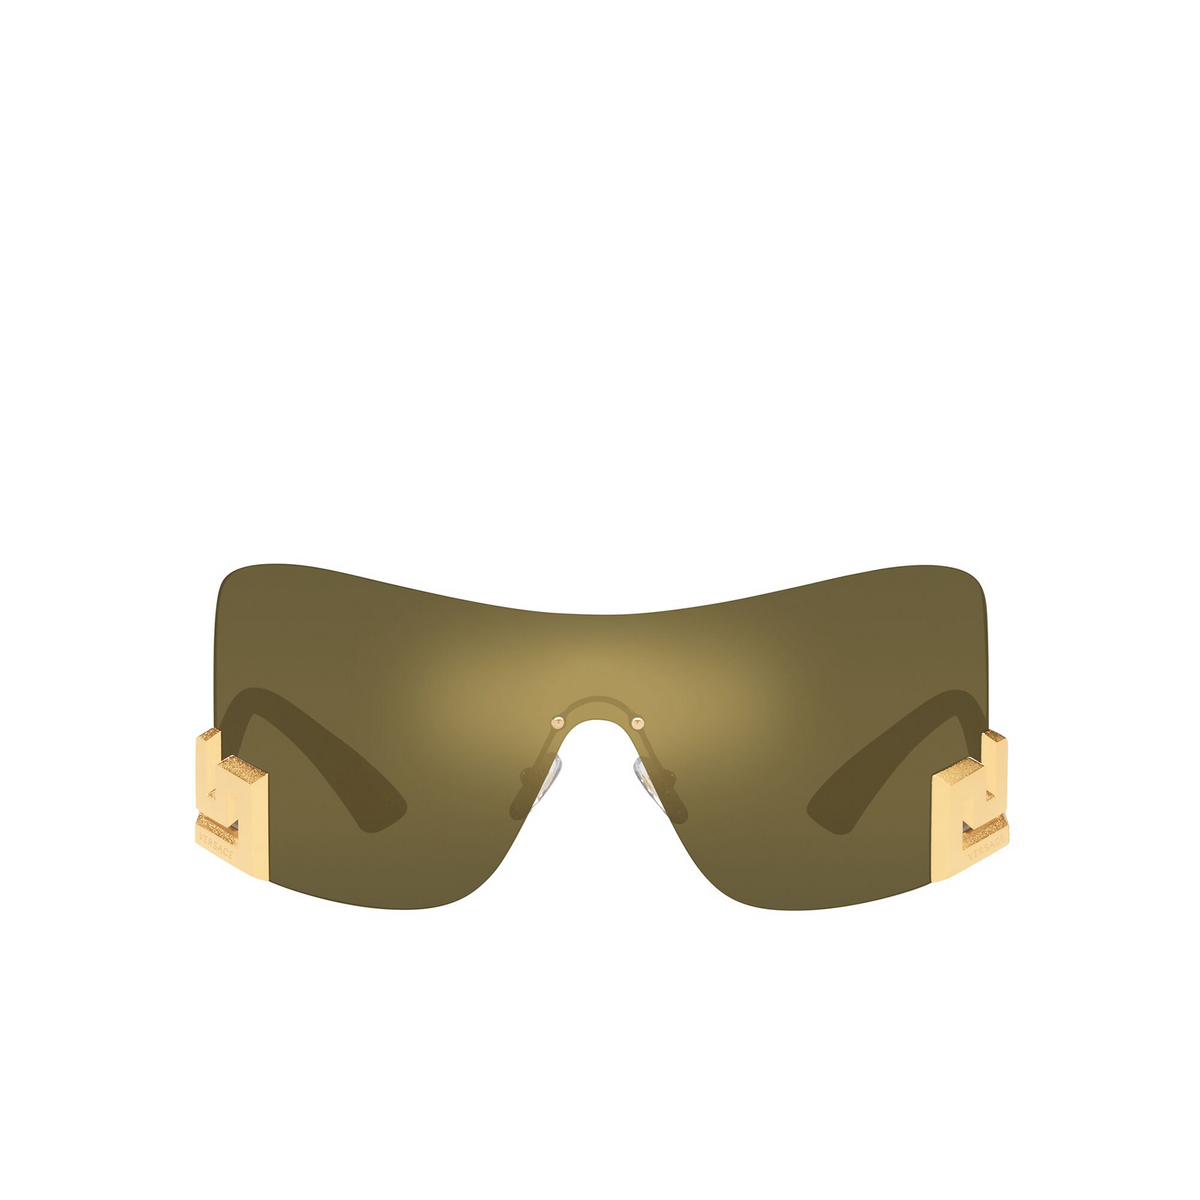 Versace® Irregular Sunglasses: VE2240 color Mirror Gold 10025A - front view.